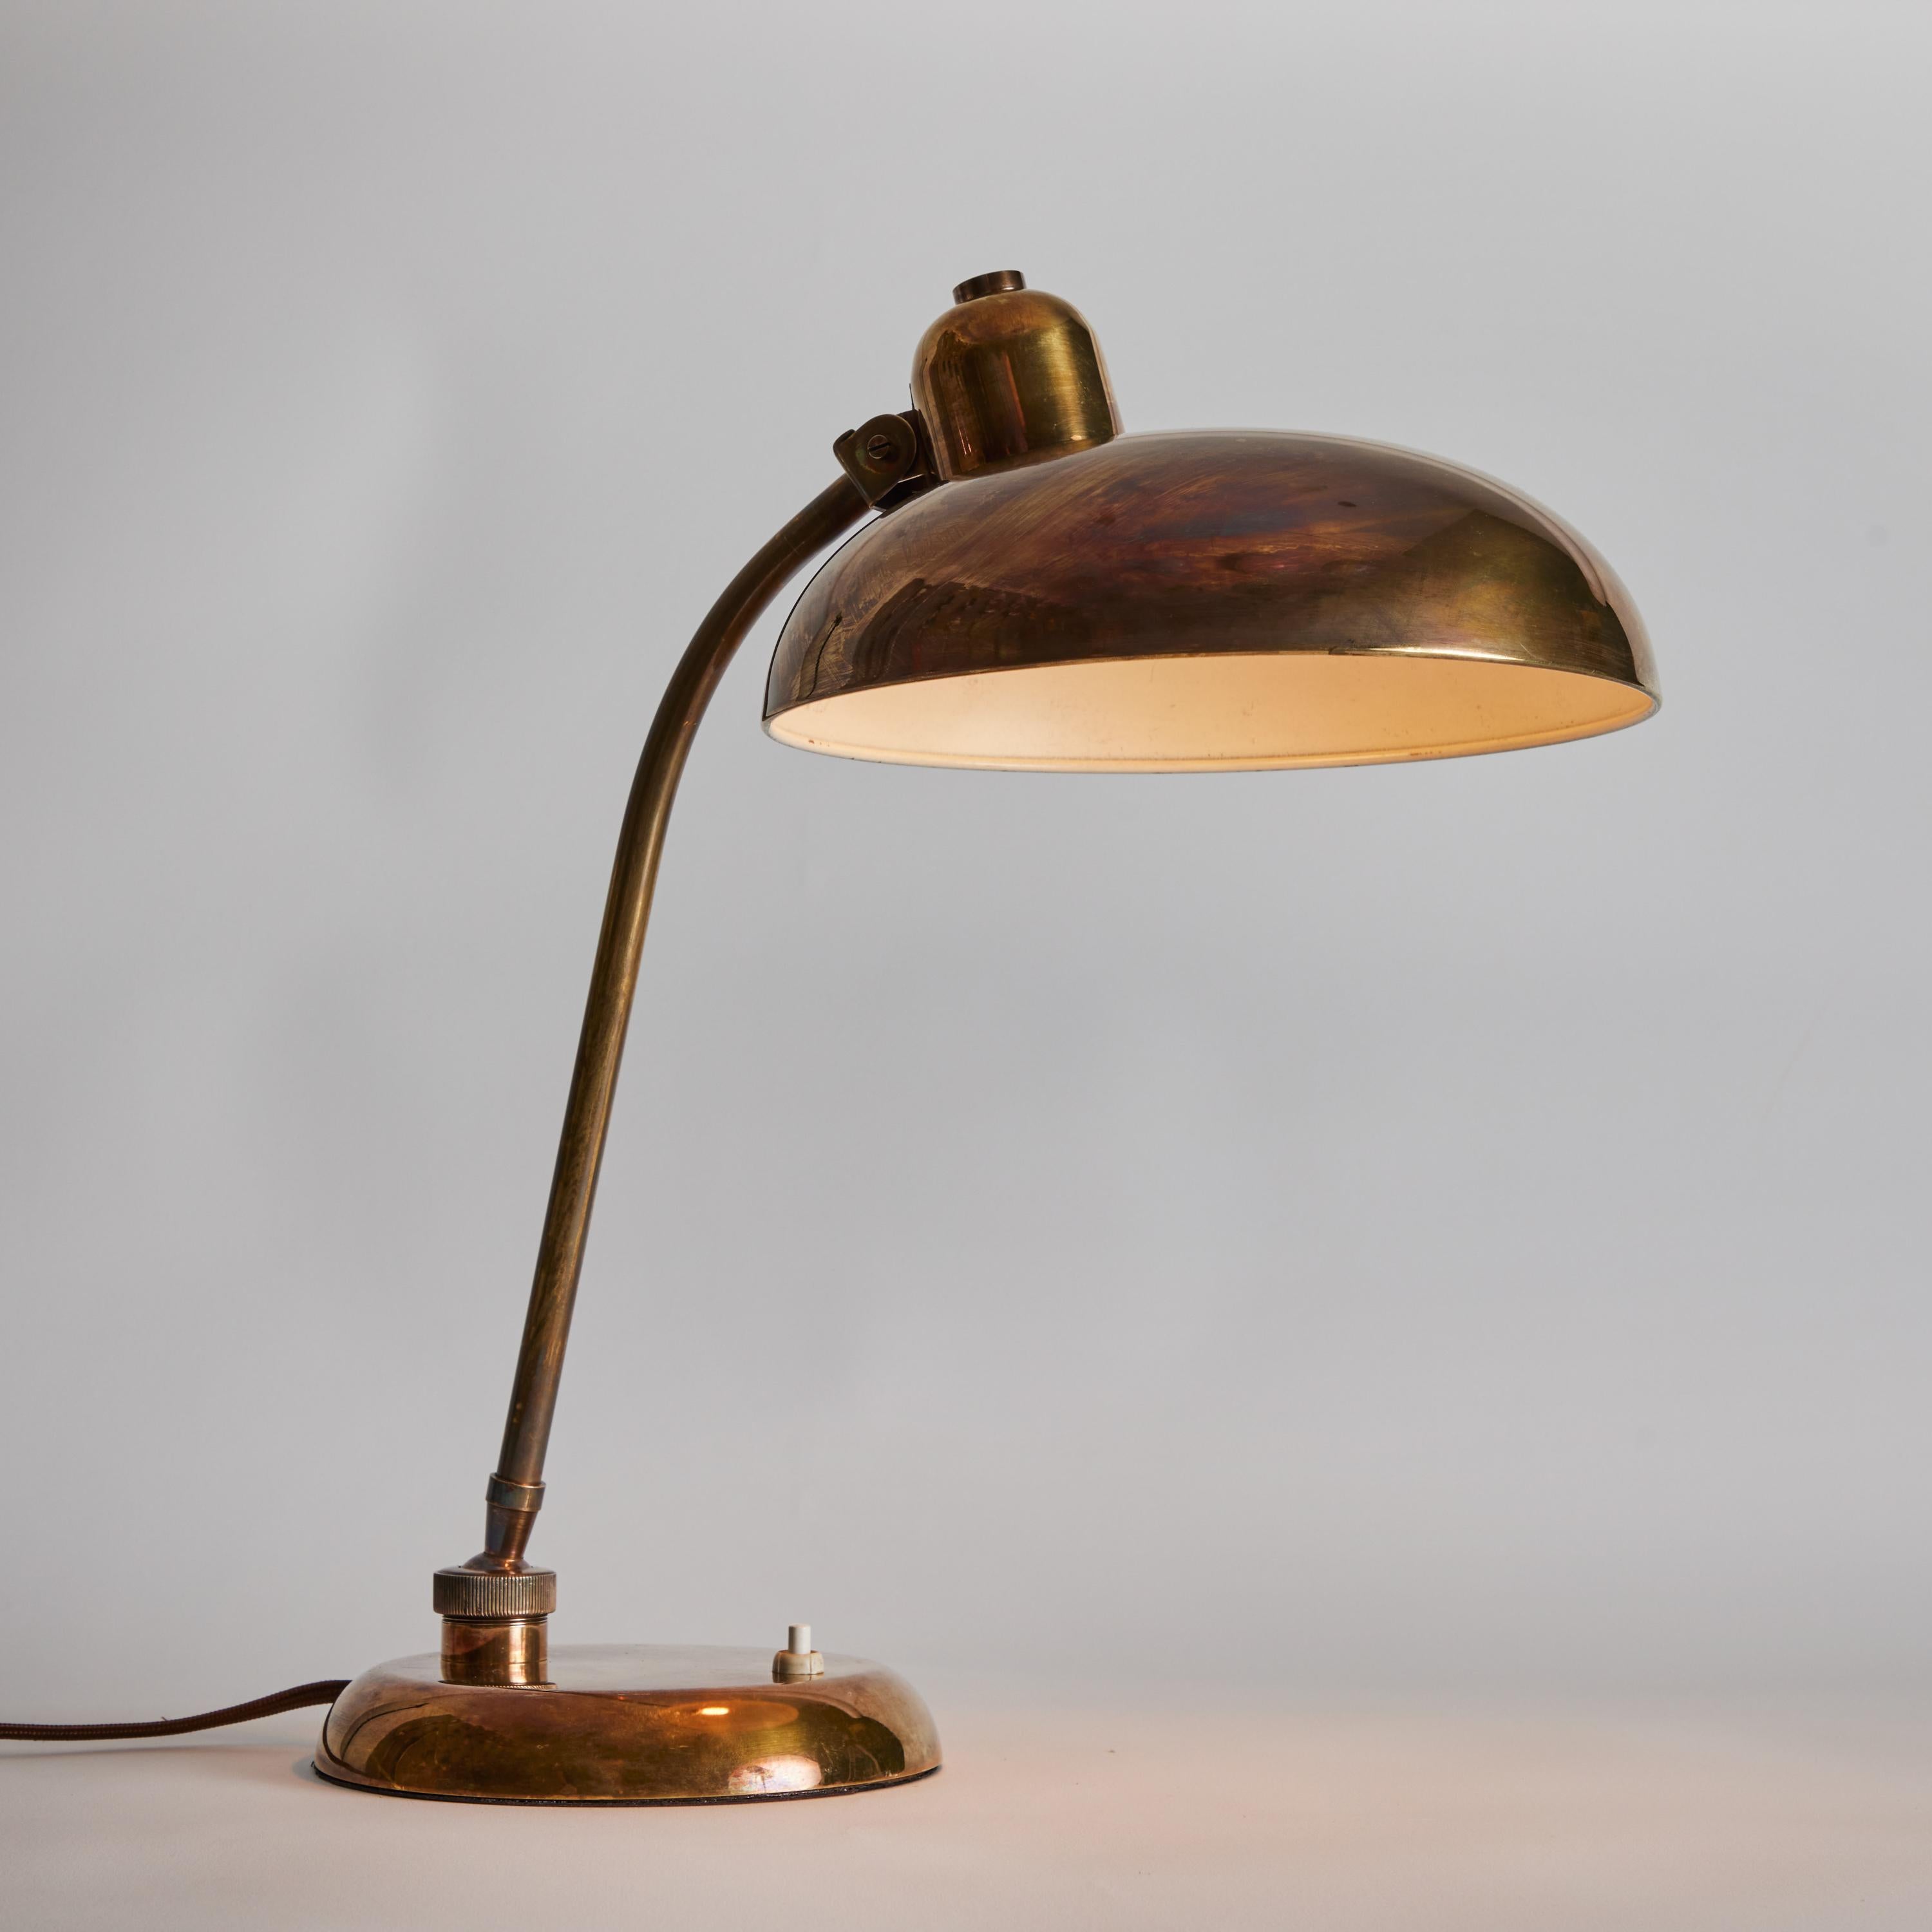 1940s Giovanni Michelucci Patinated Brass Ministerial Table Lamp for Lariolux 1